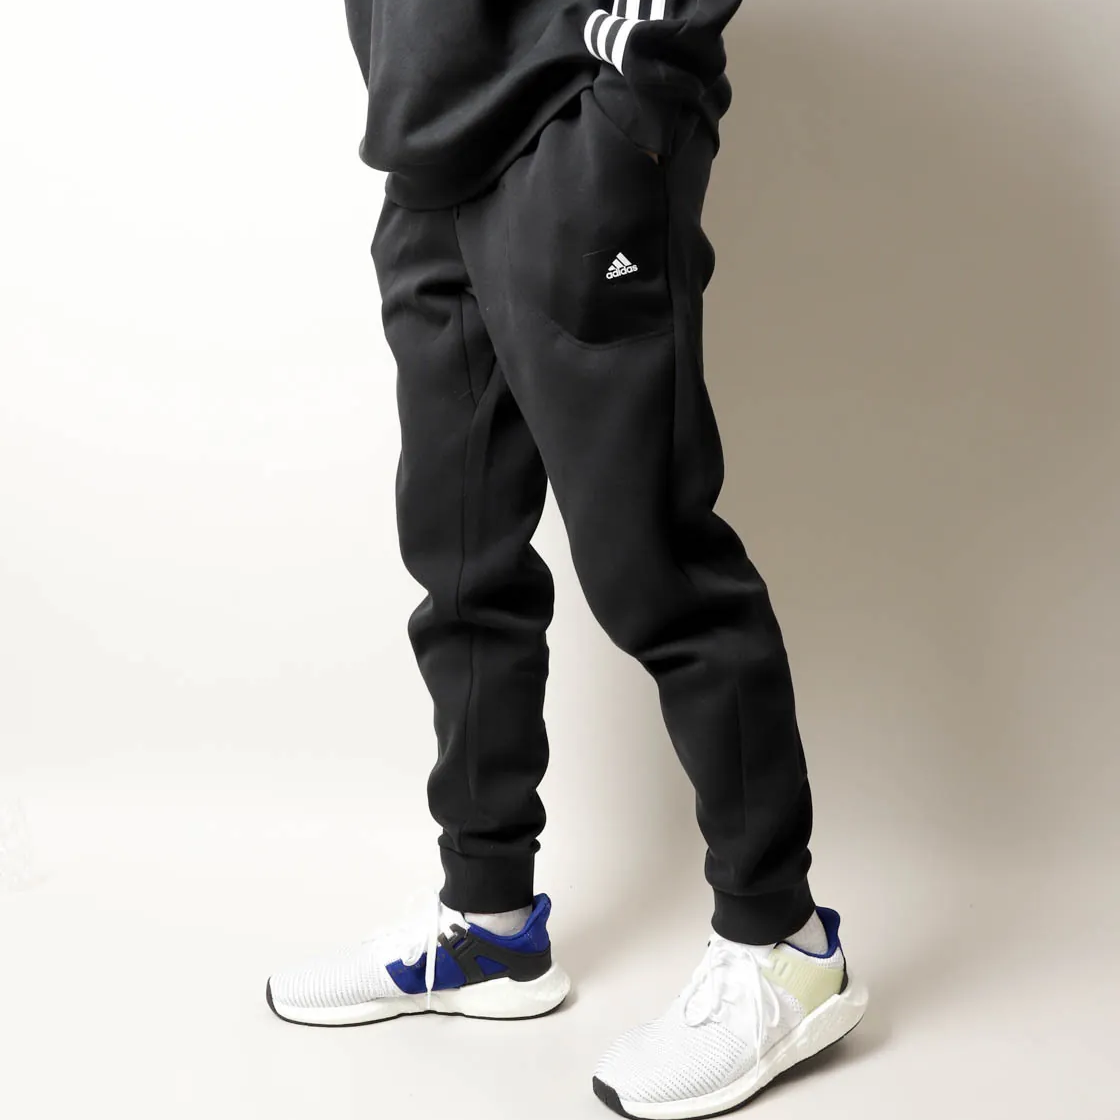 Track Pant Men SG MTPSSR068 Steel Grey S : Amazon.in: Clothing & Accessories